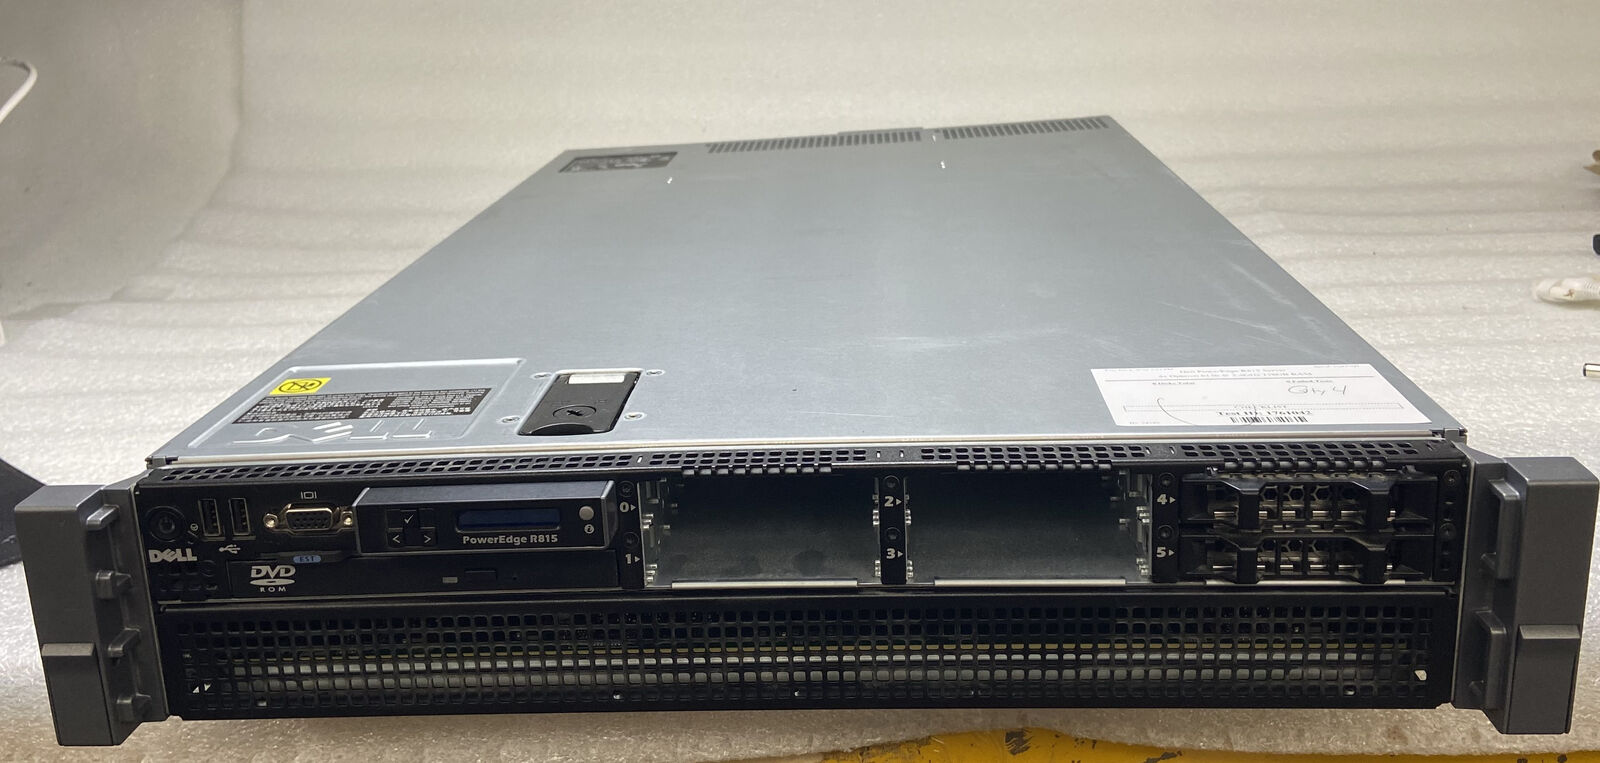 Dell PowerEdge R815 Server 2U BOOTS (4x) Opteron 6136 2.4Ghz 128GB RAM NO HDD